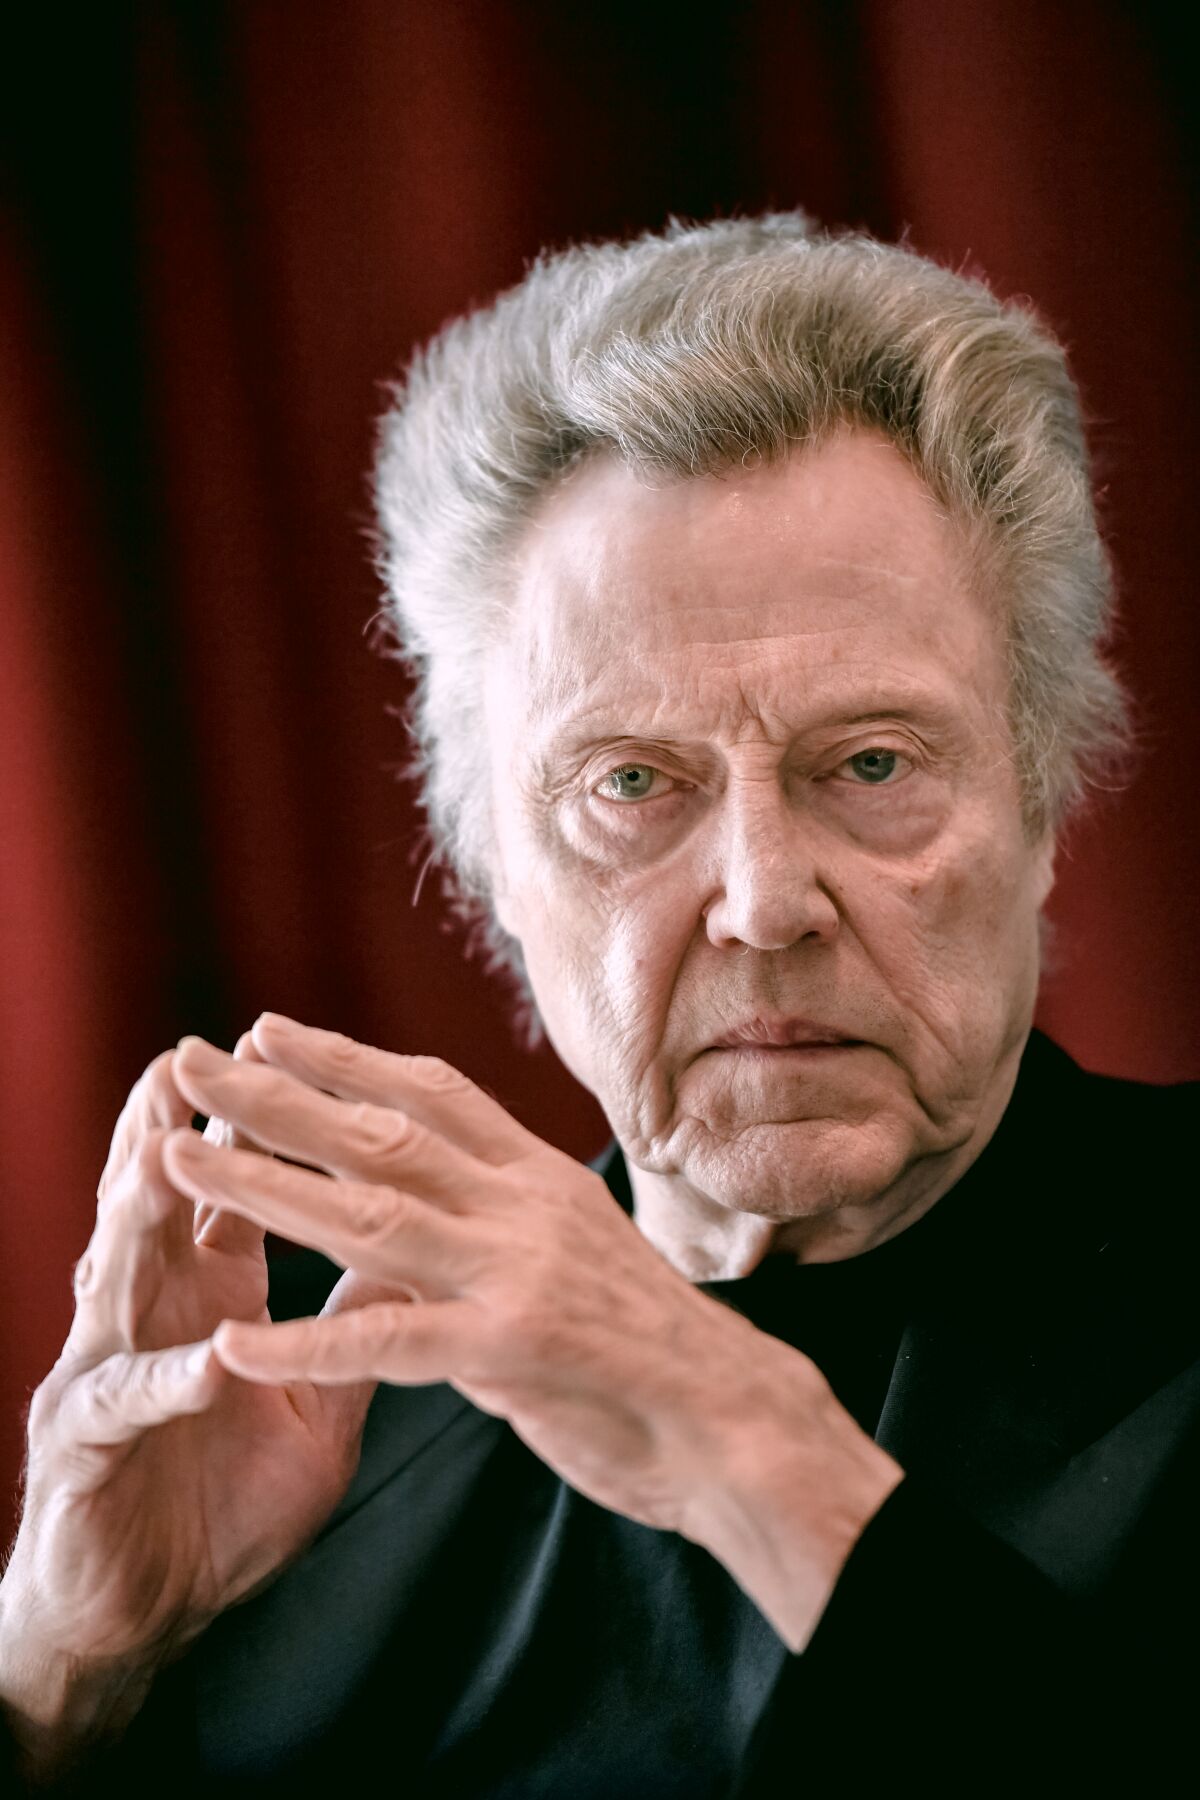 Christopher Walken, seen in 2019, plays Frank in "The Outlaws."